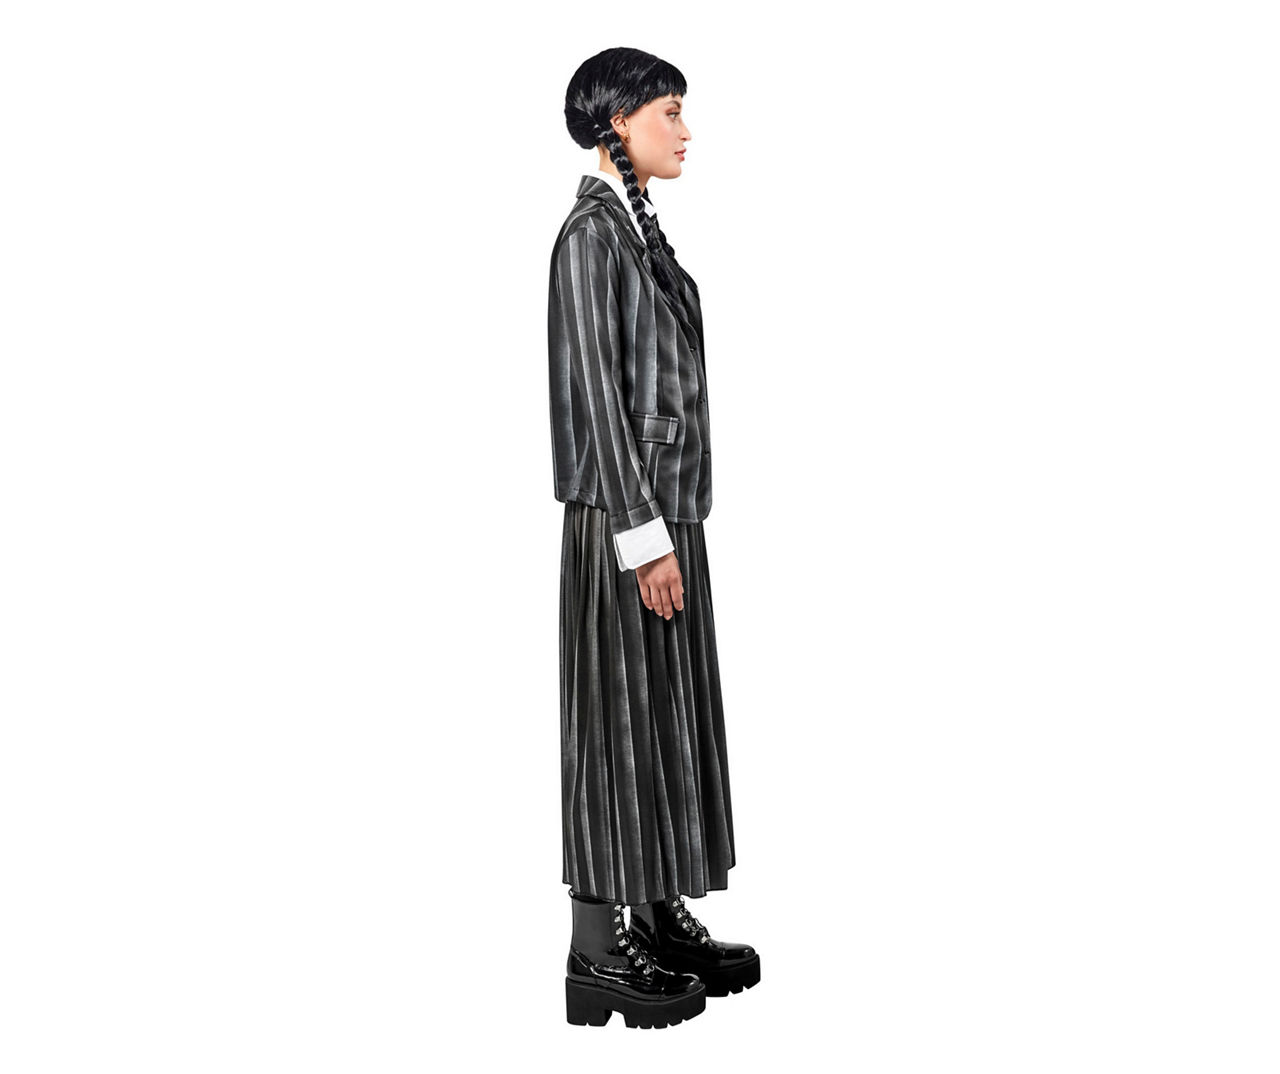 Rubie's Costumes X-large The Addams Family Wednesday Addams